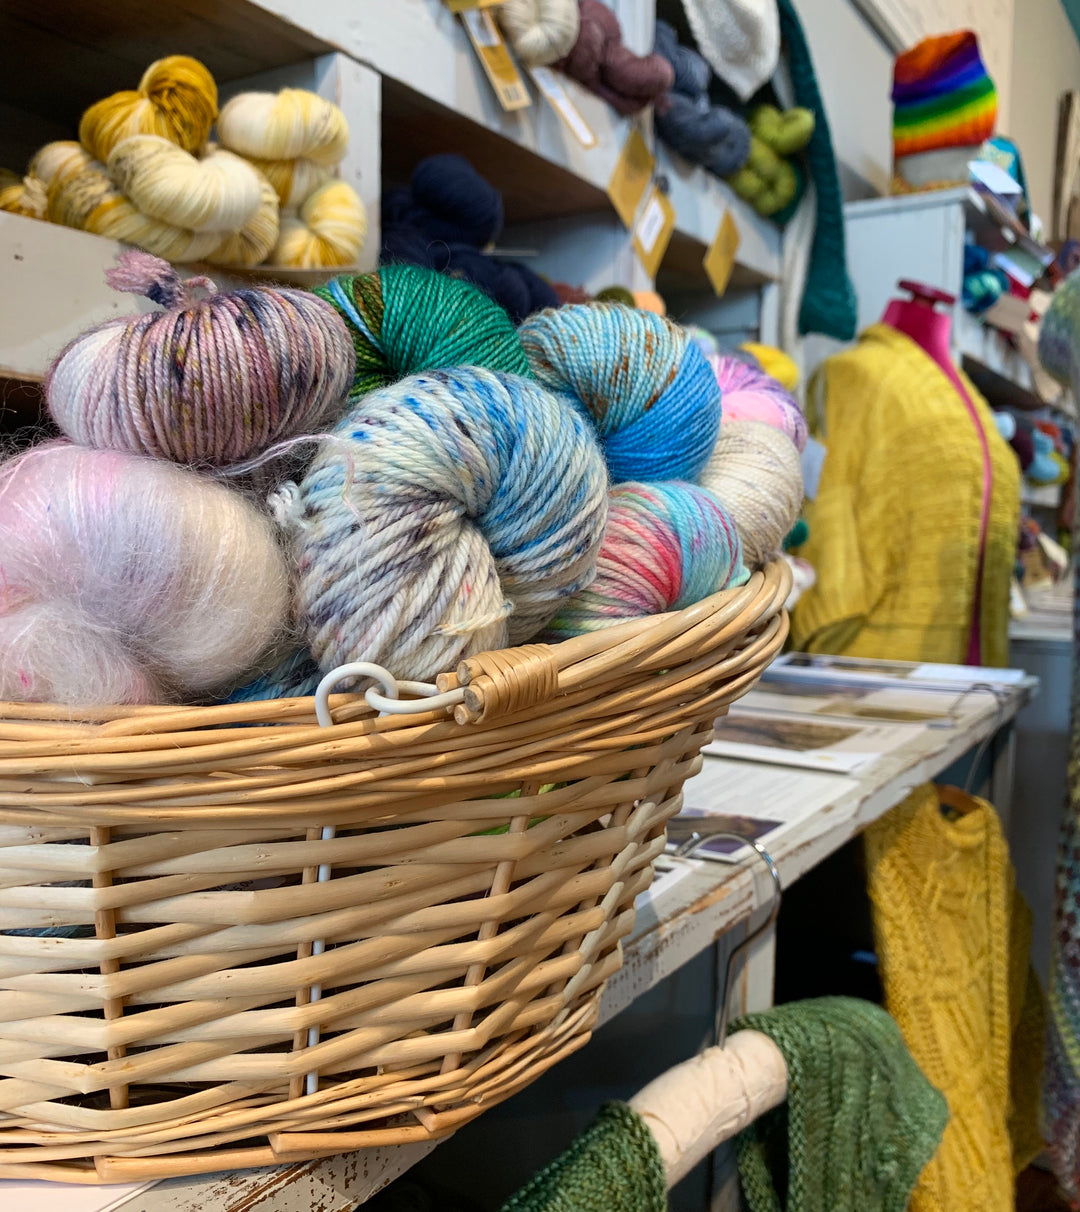 What On Earth Are You Gonna Do With That Variegated Yarn?